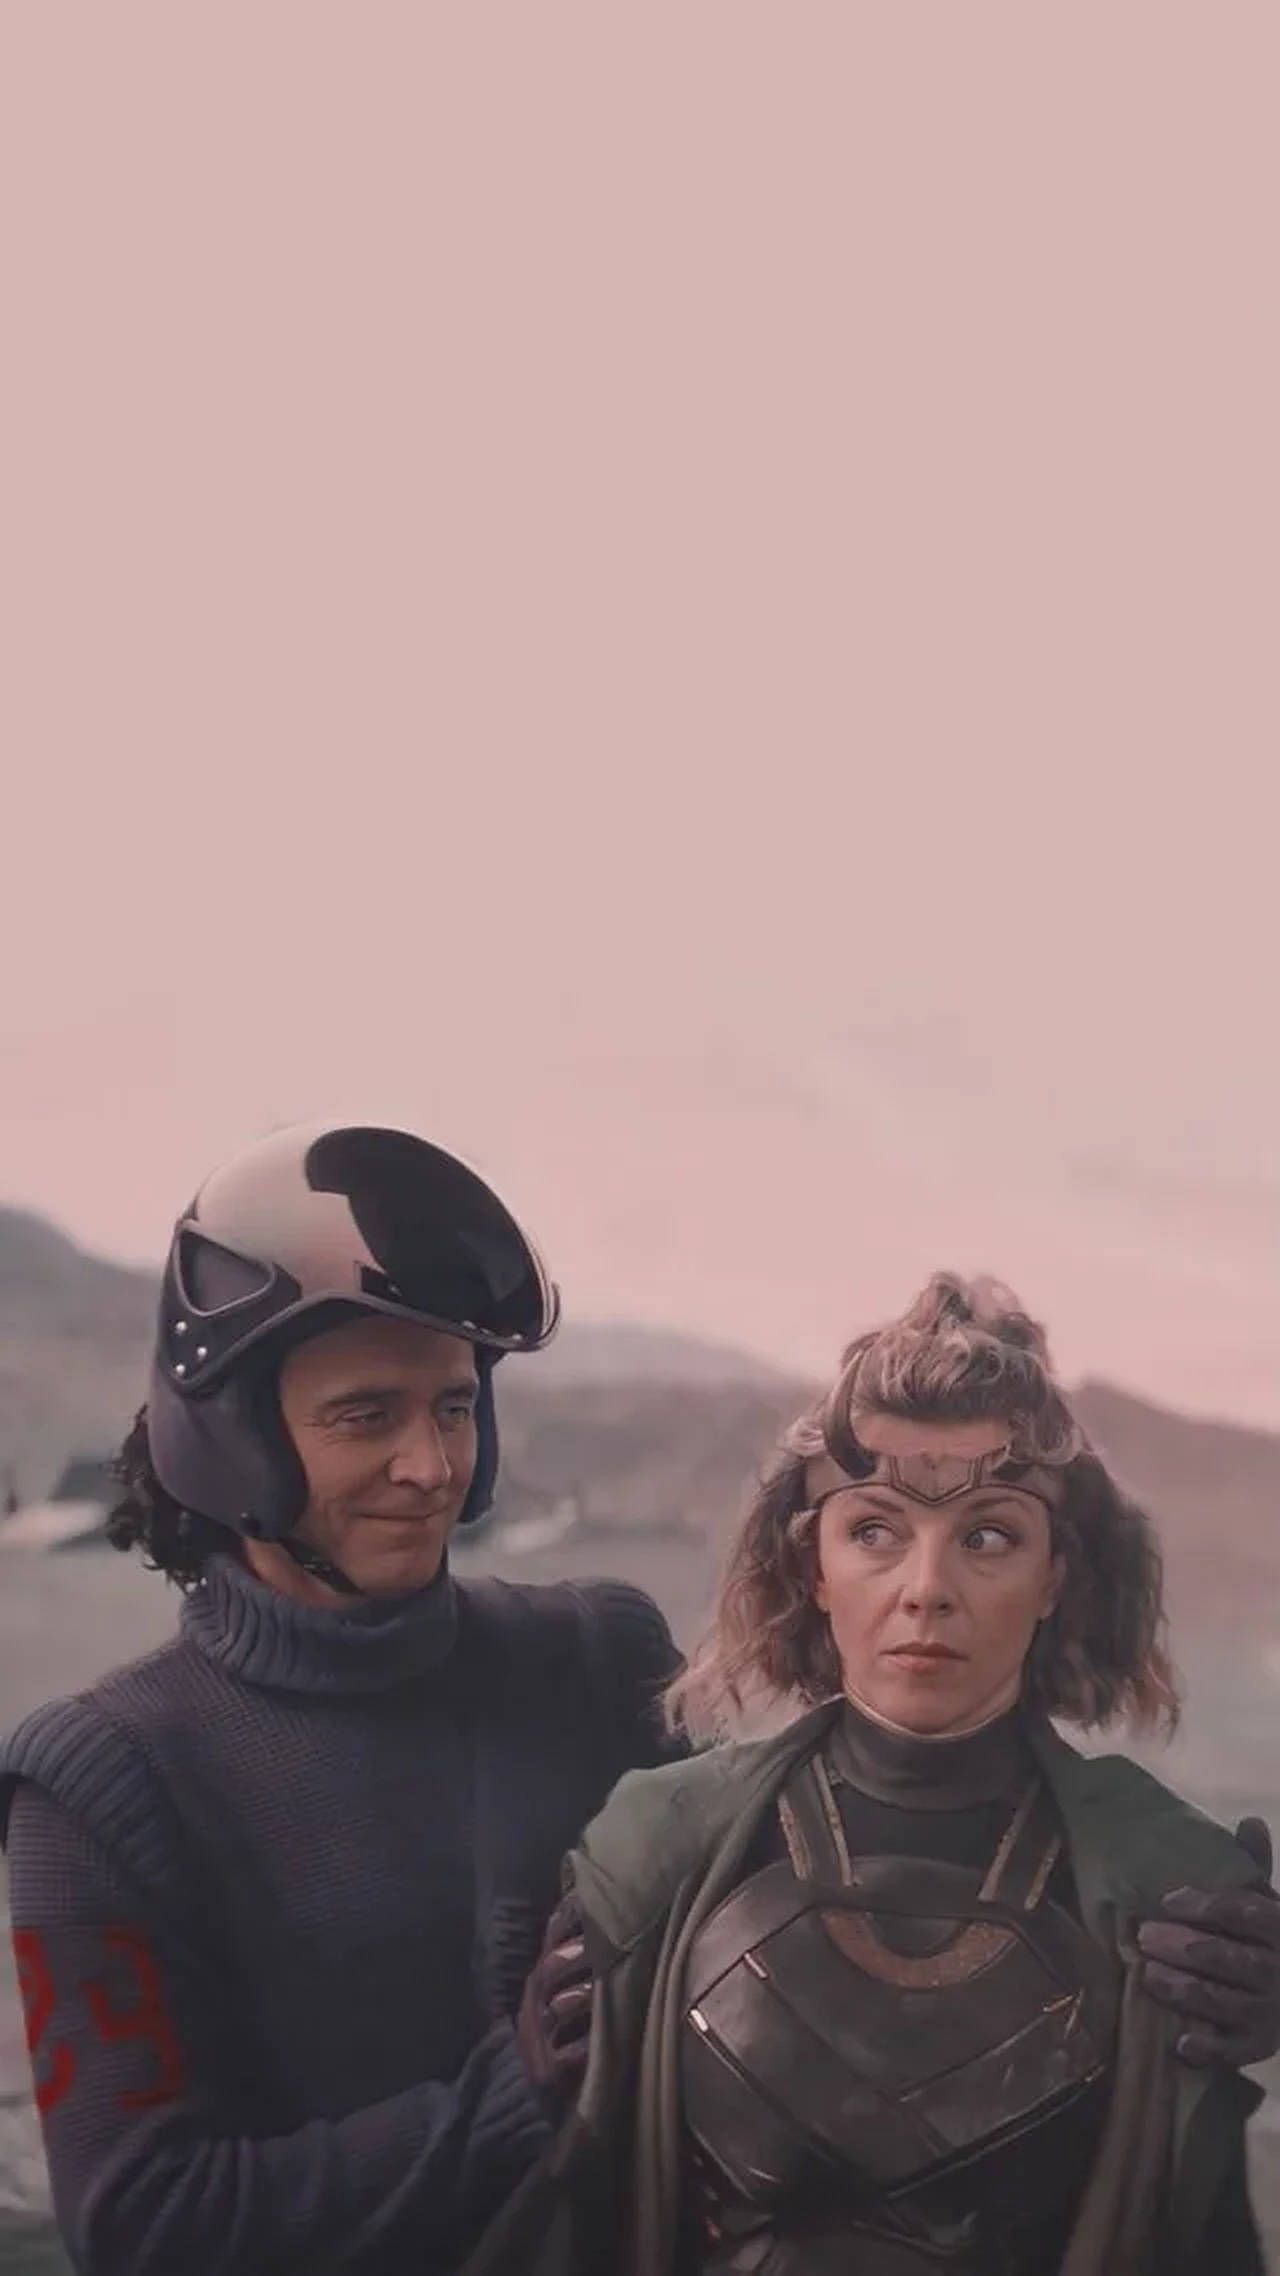 A man and woman standing together in the desert - Loki